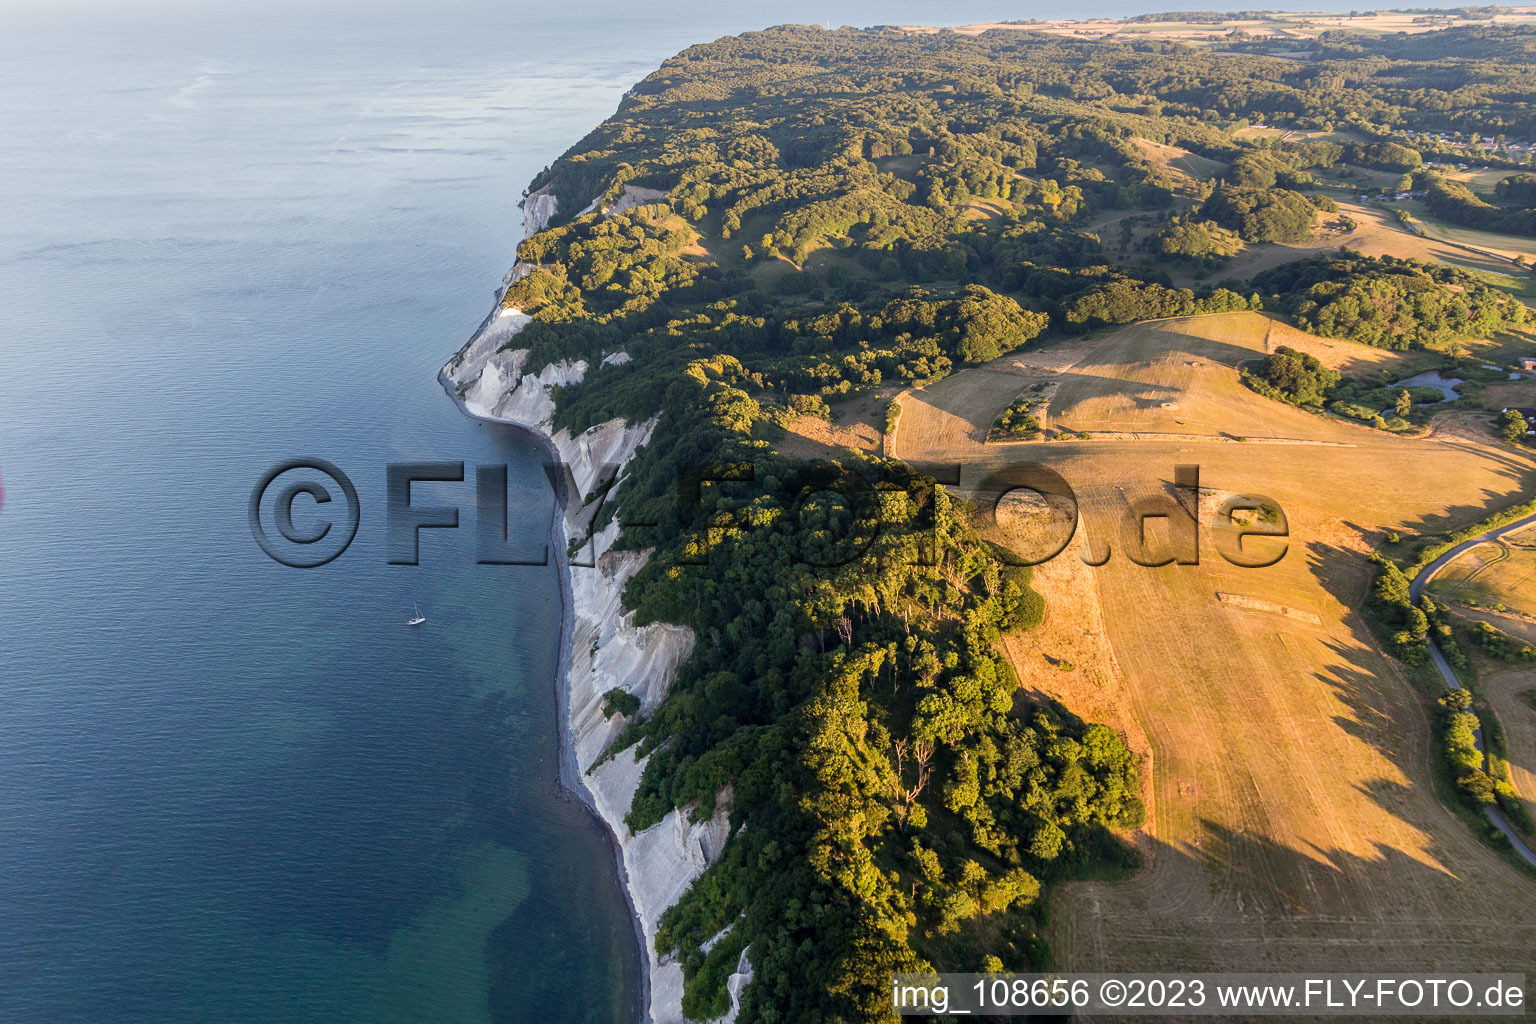 Drone image of Borre in the state Zealand, Denmark